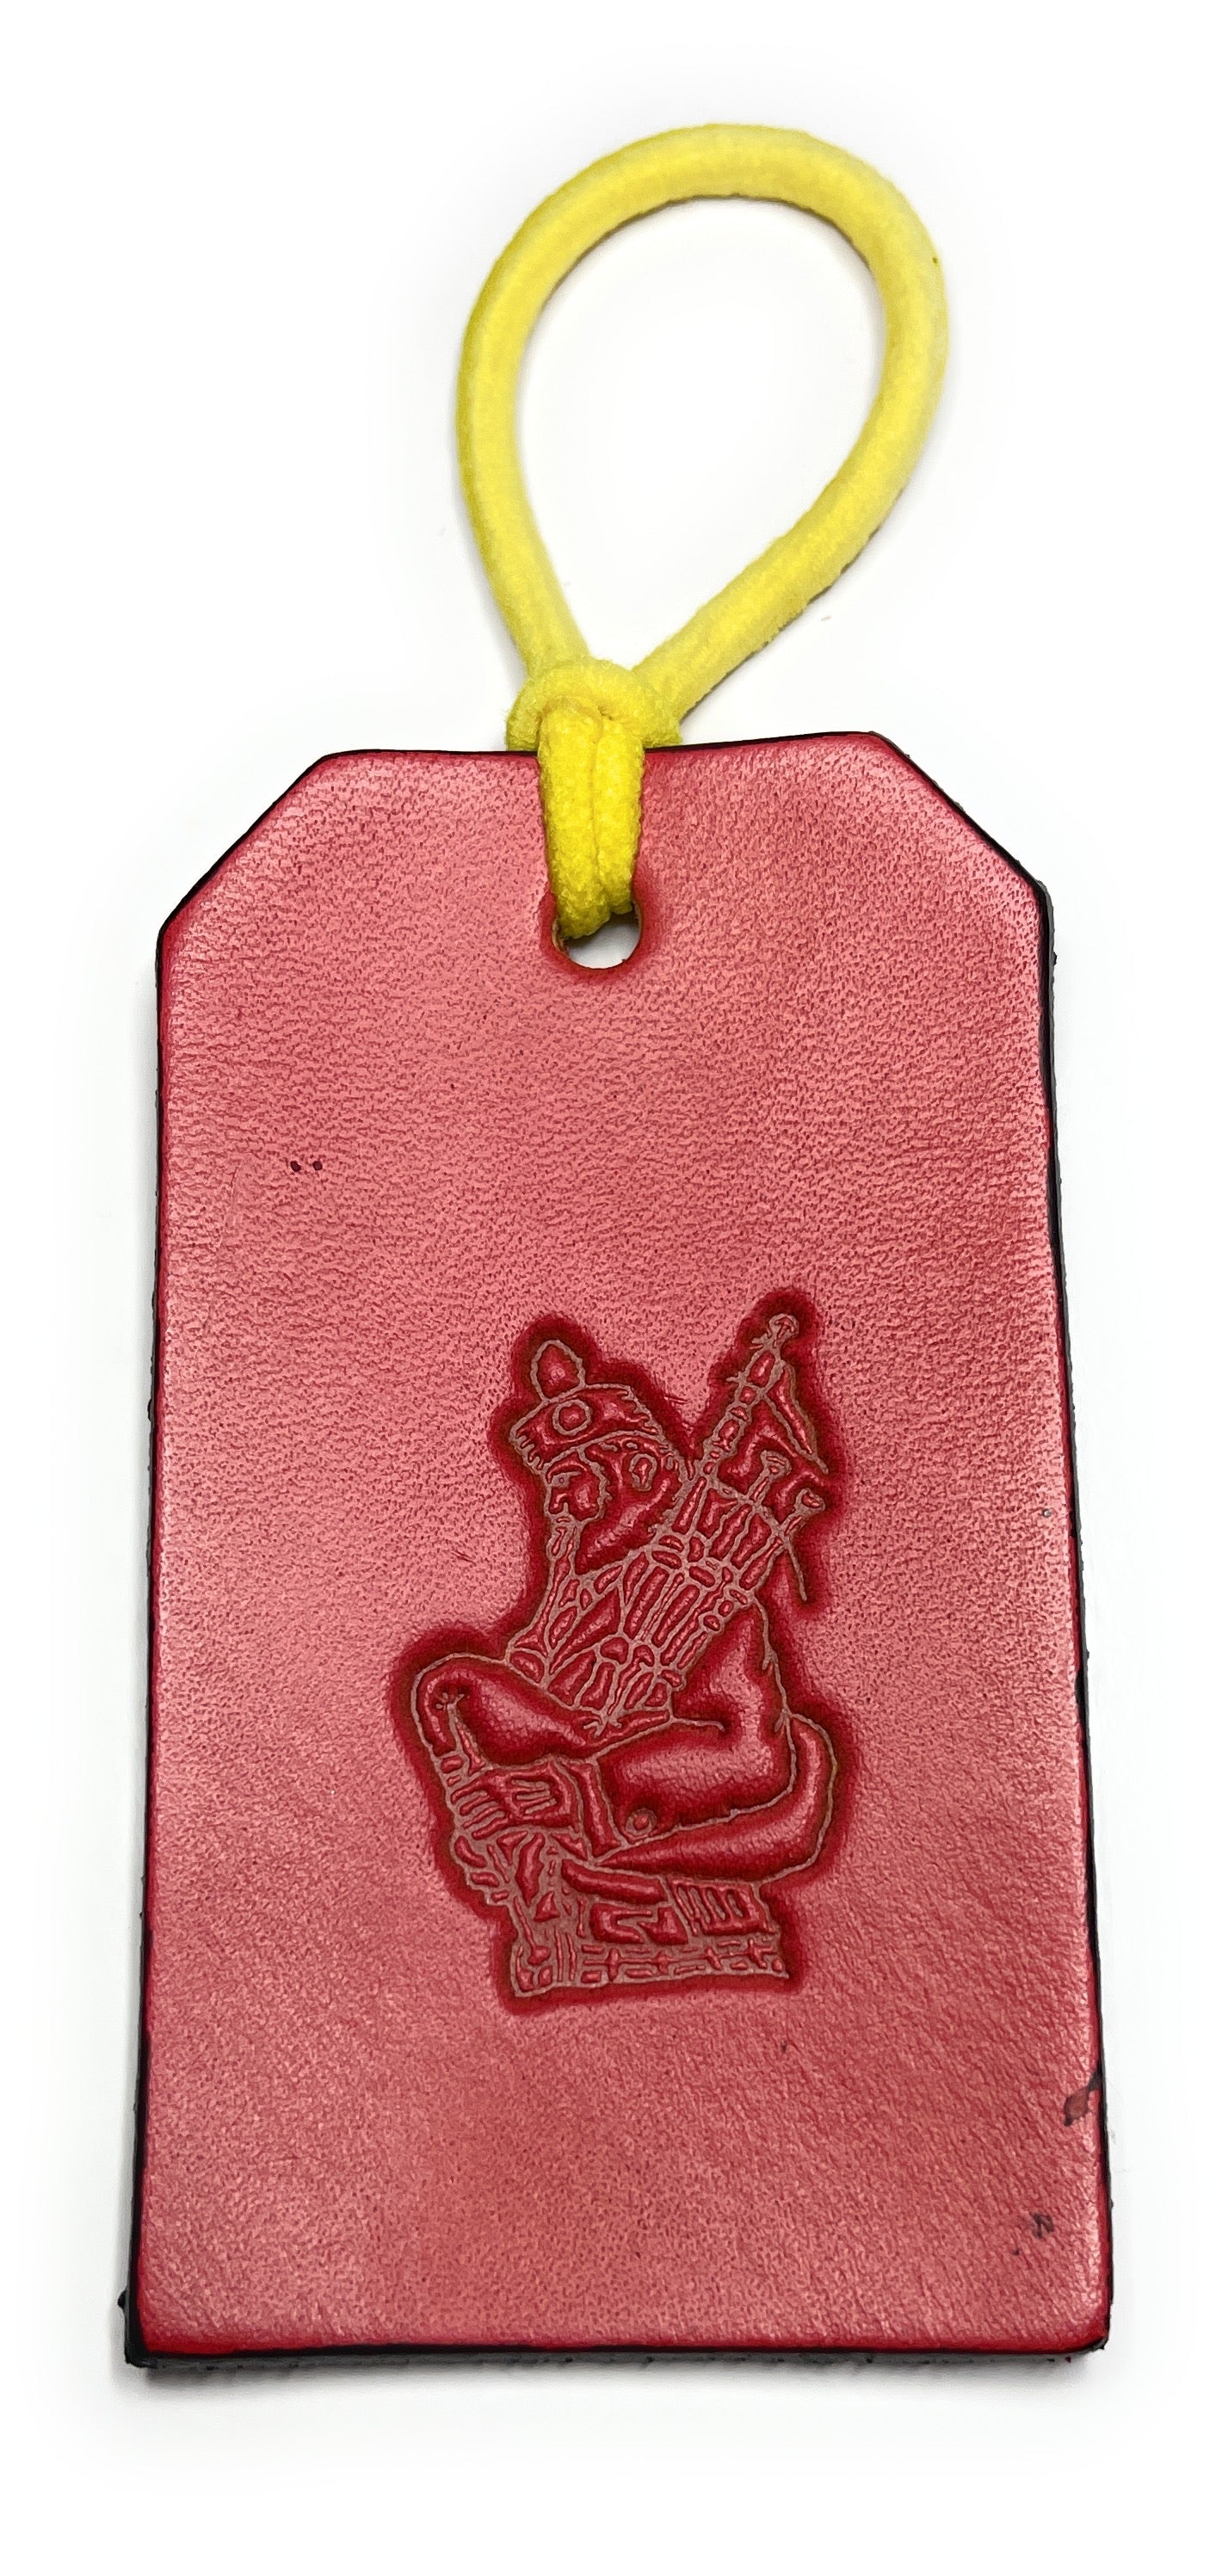 Handmade Leather Bagpiper Vintage Red Luggage Tag Bag Charm